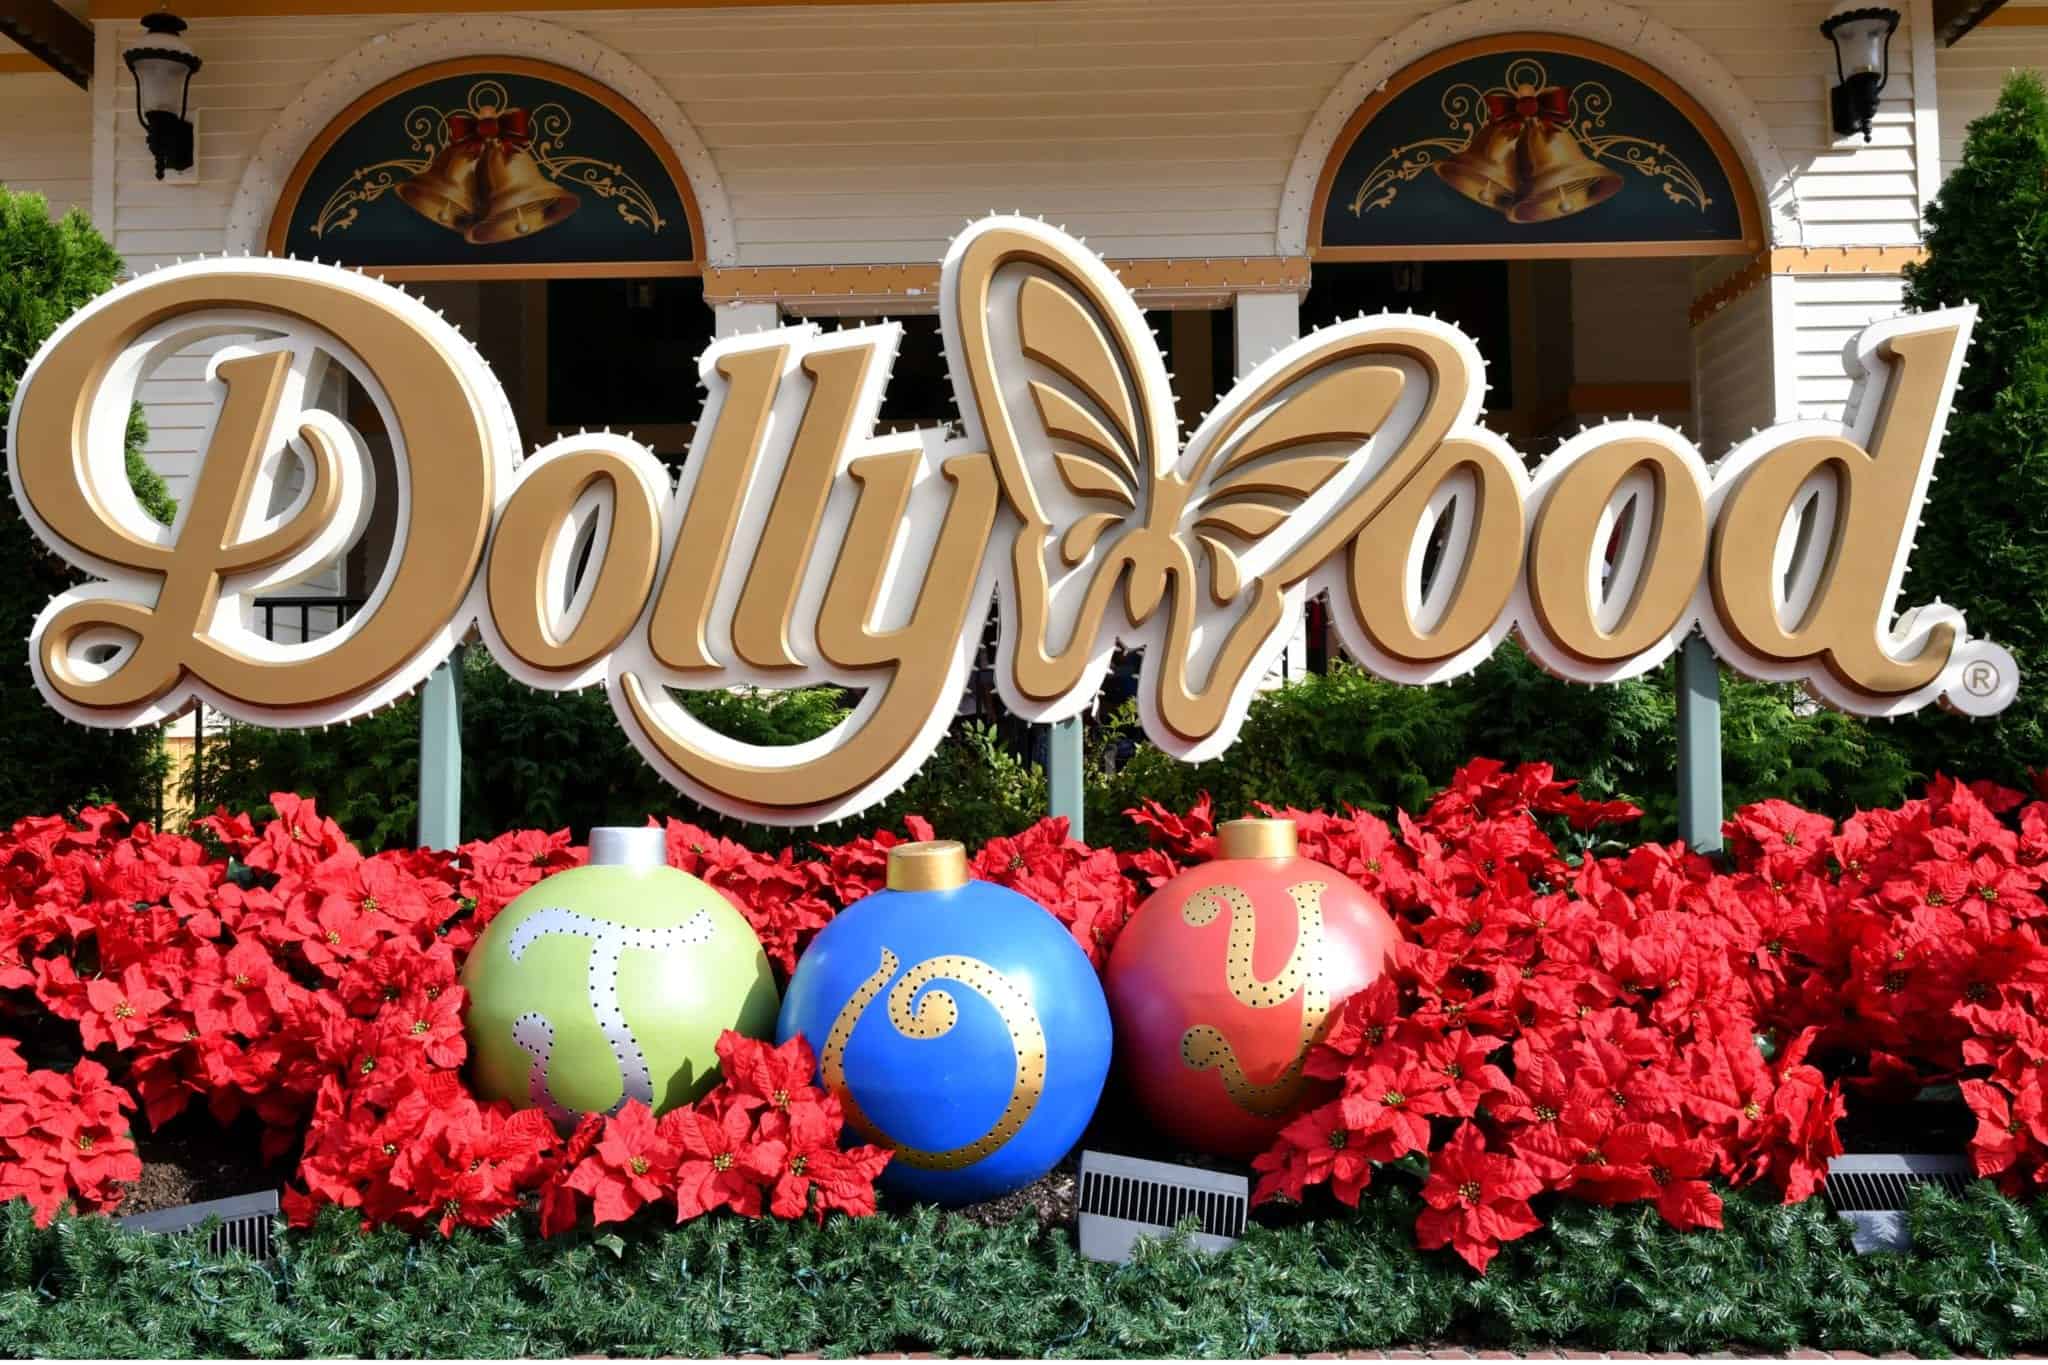 Dollywood sign with christmas ornaments in front